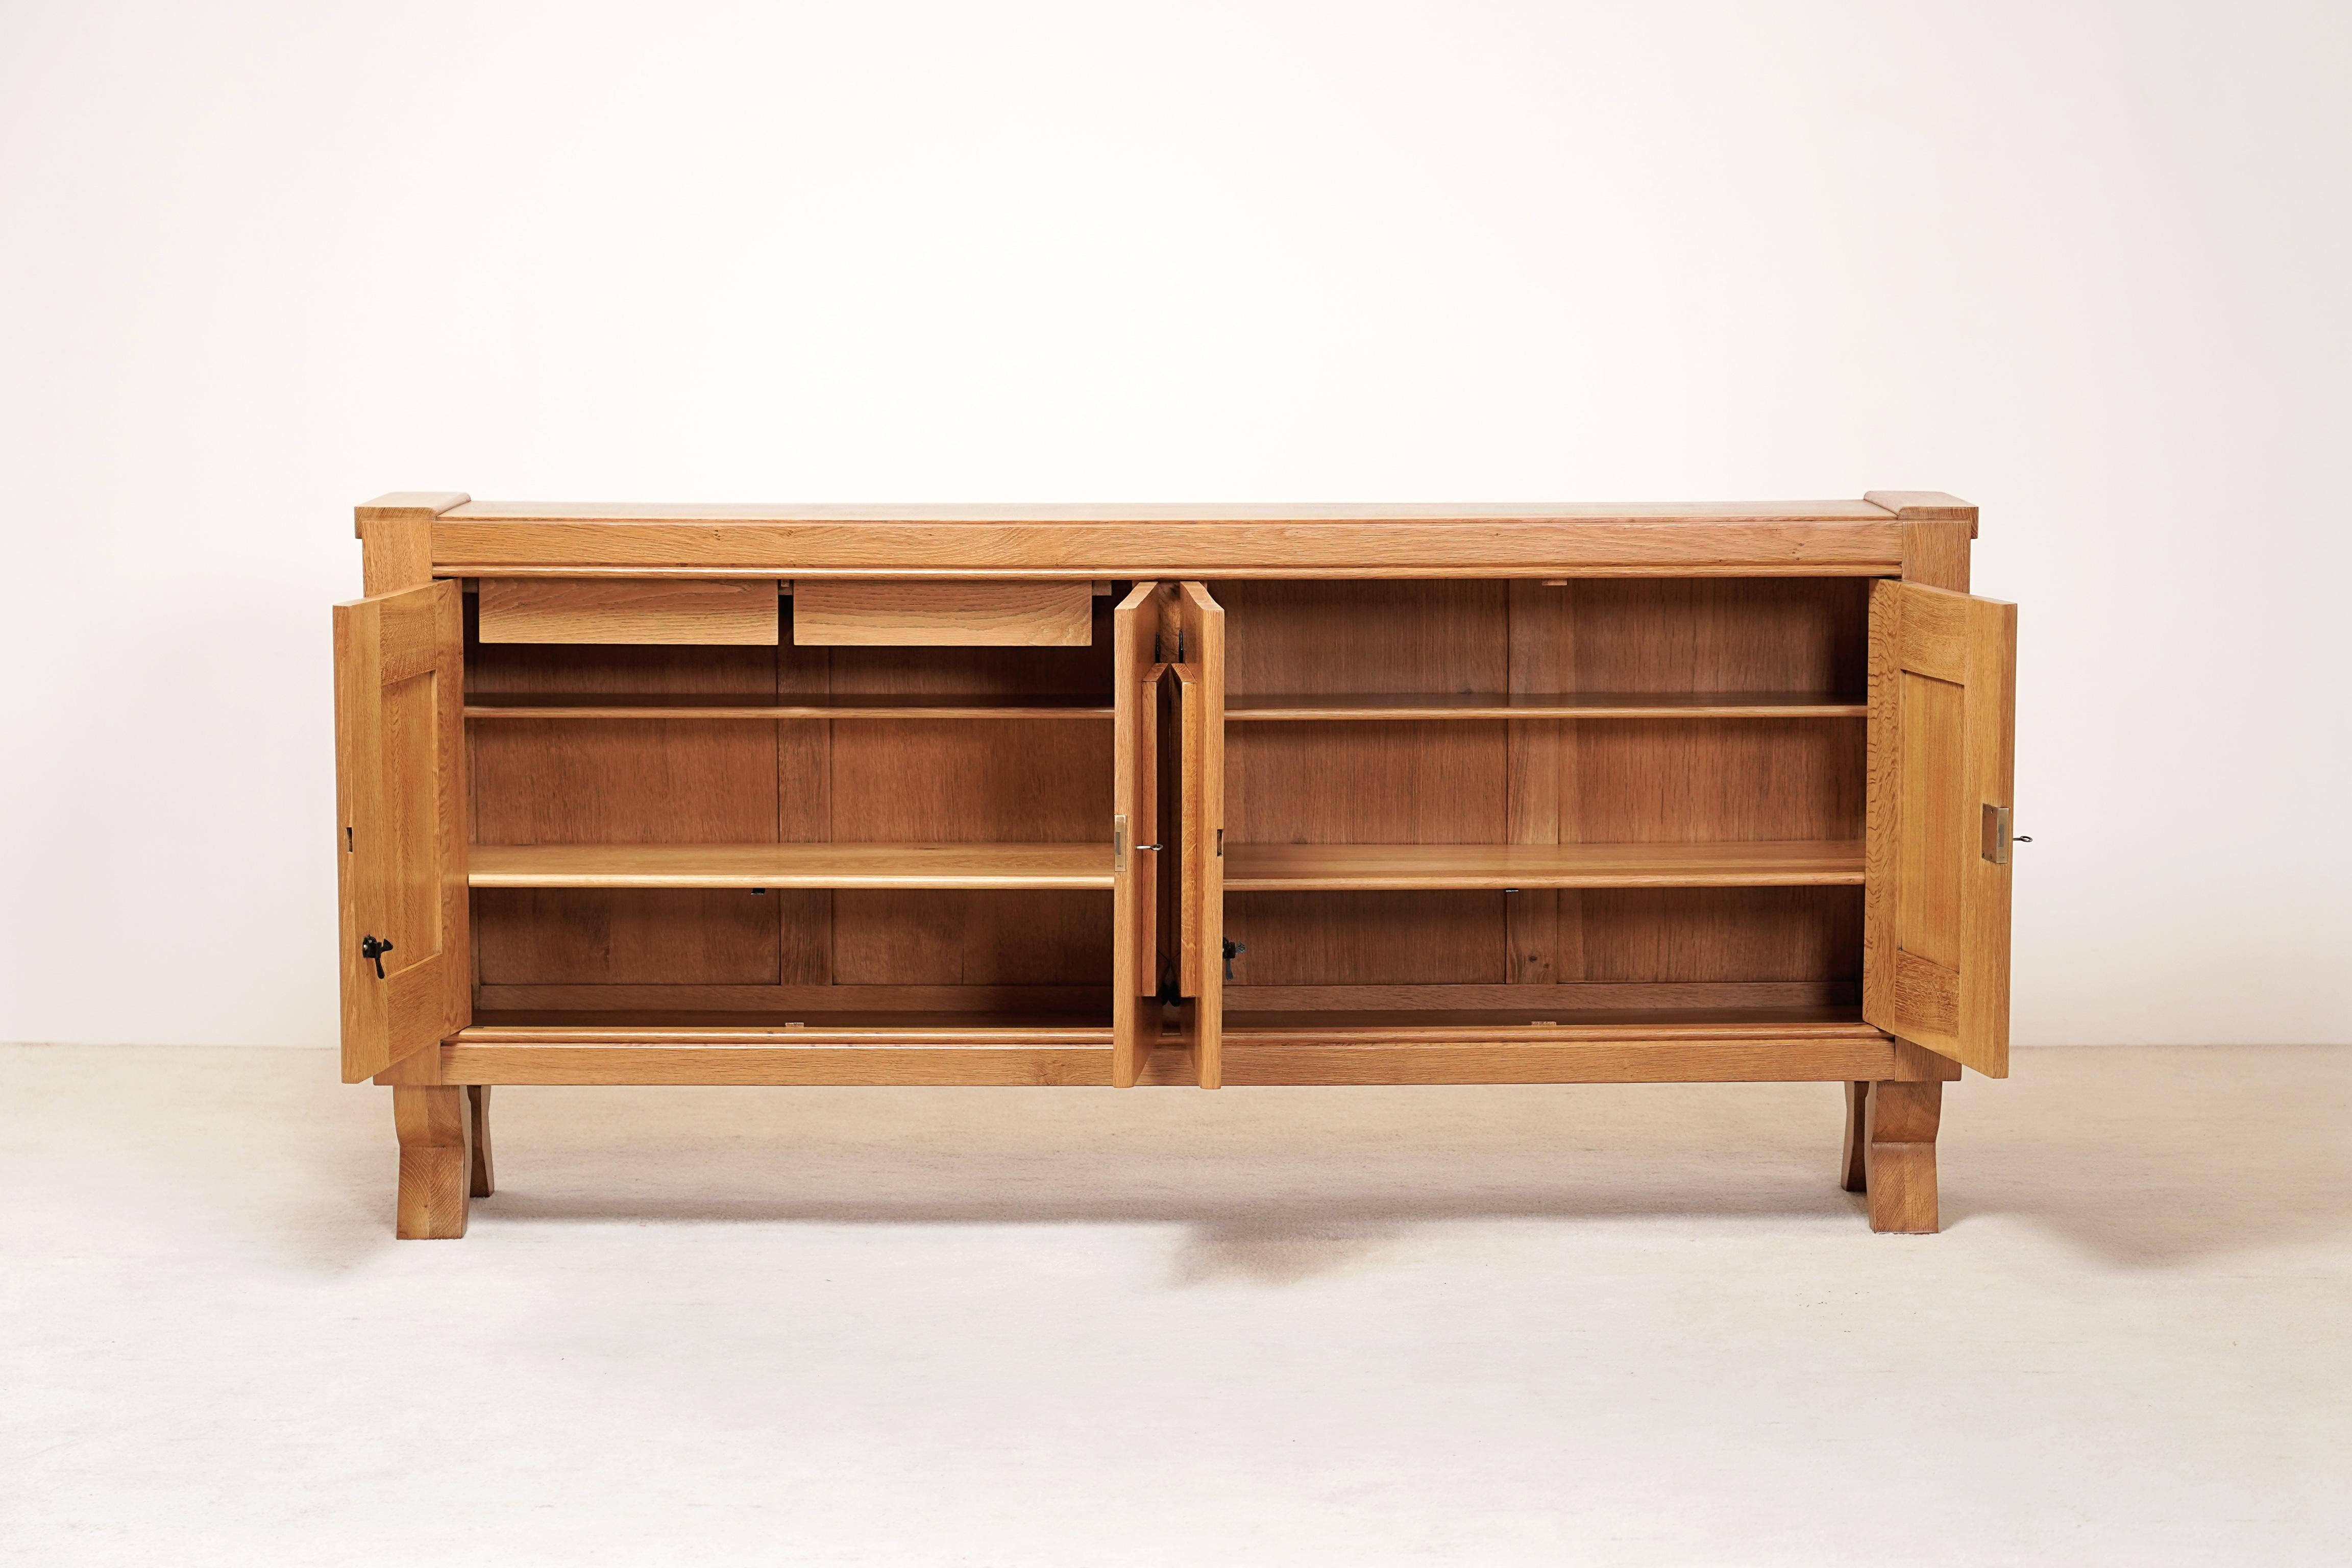 Guillerme and Chambron, Rare Early Period Sideboard for Votre Maison